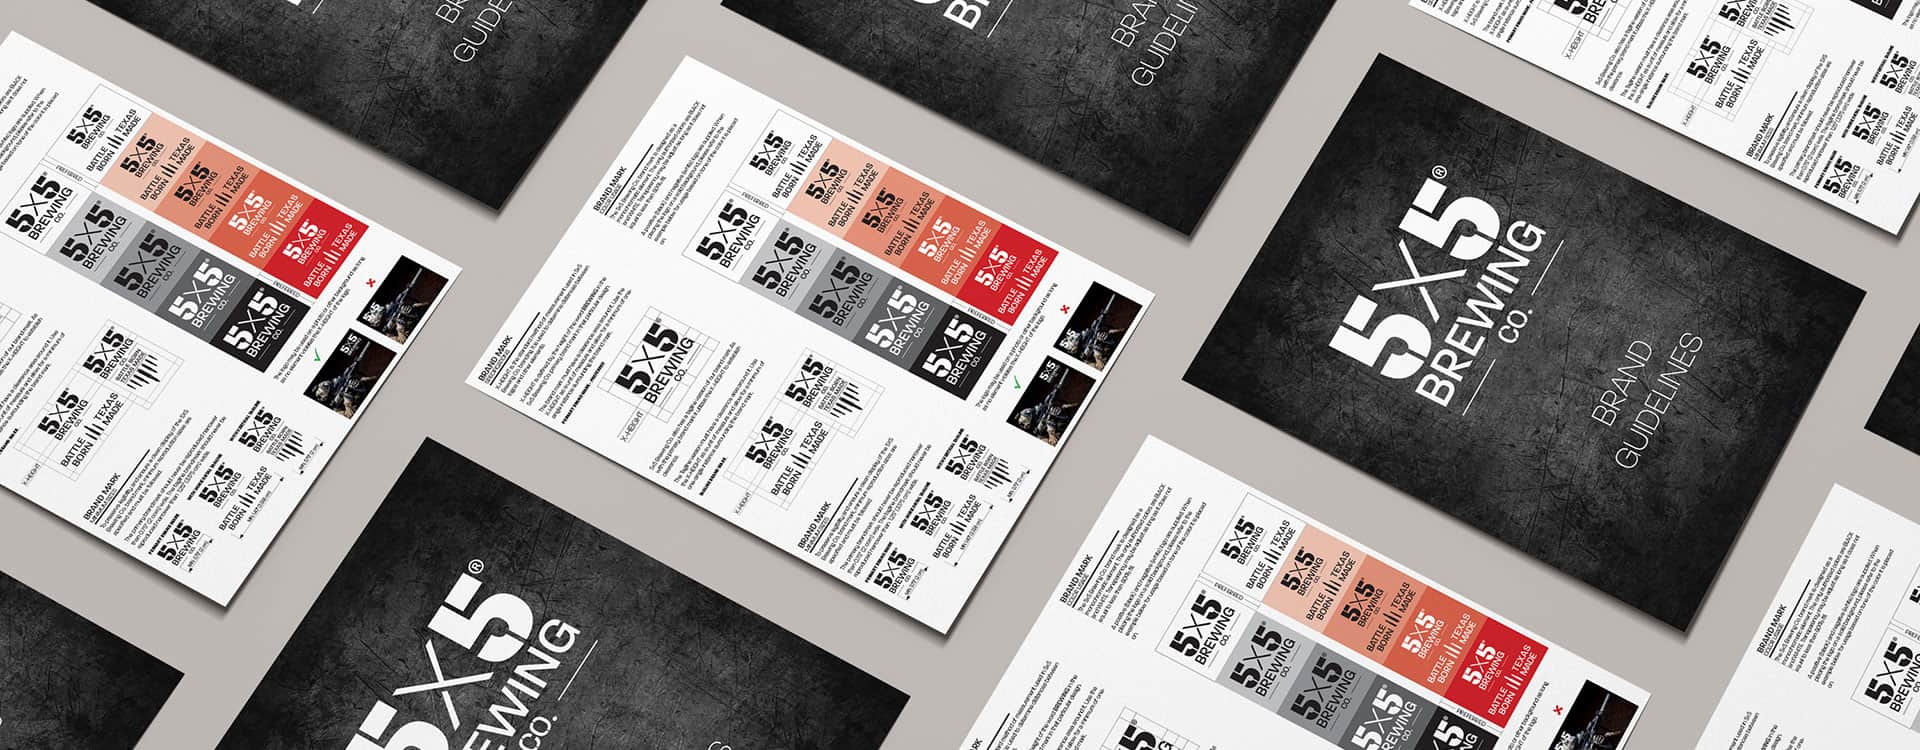 5x5 brewing co brand guidelines